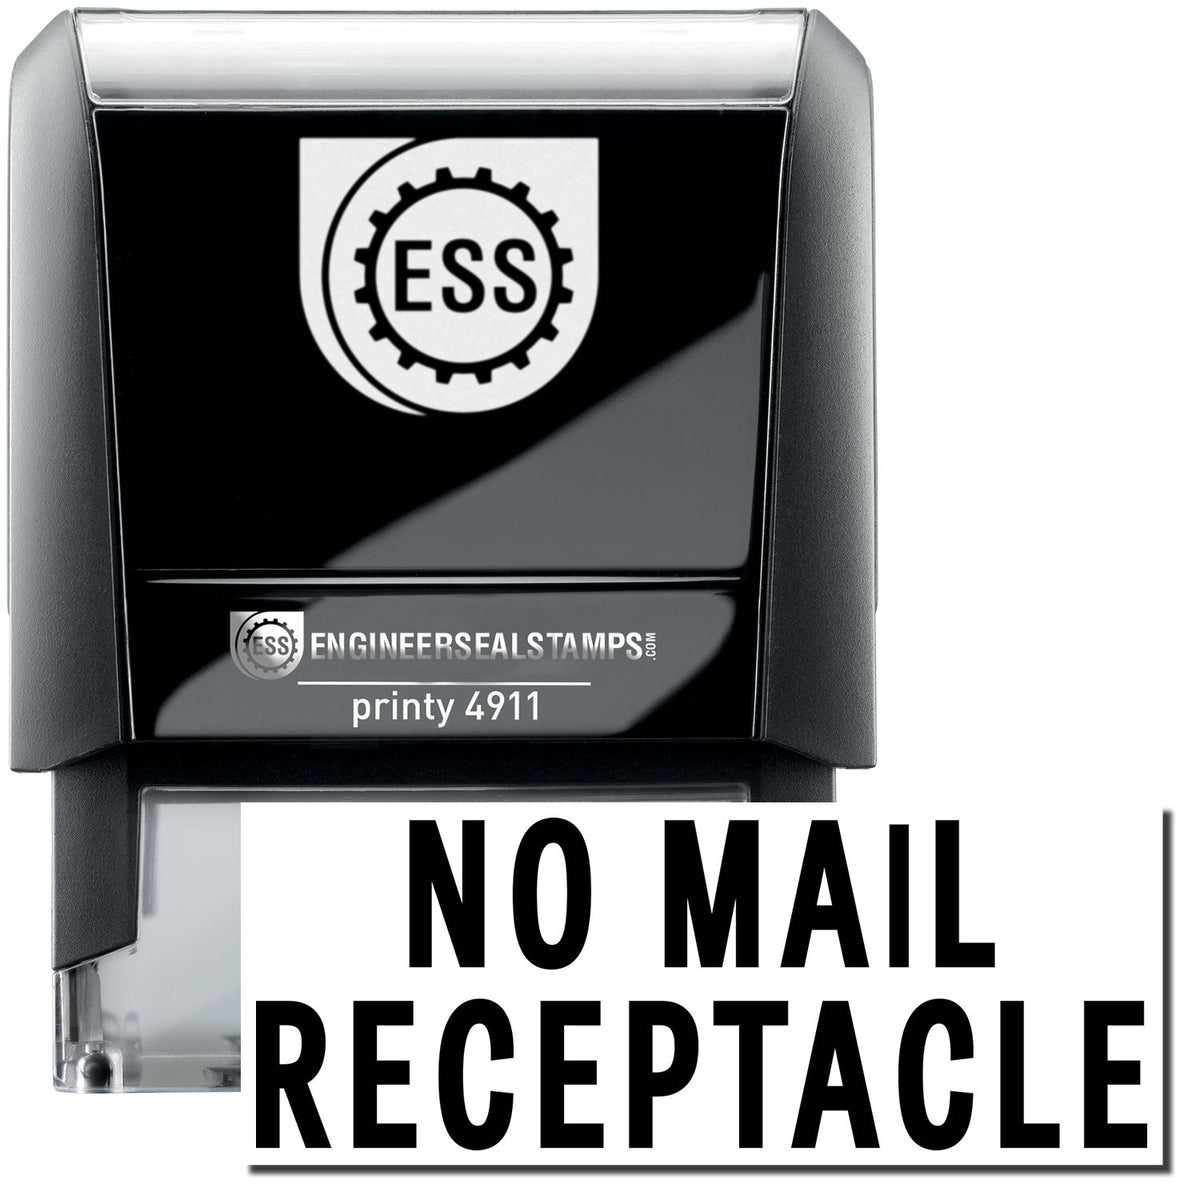 A self-inking stamp with a stamped image showing how the text &quot;NO MAIL RECEPTACLE&quot; is displayed after stamping.